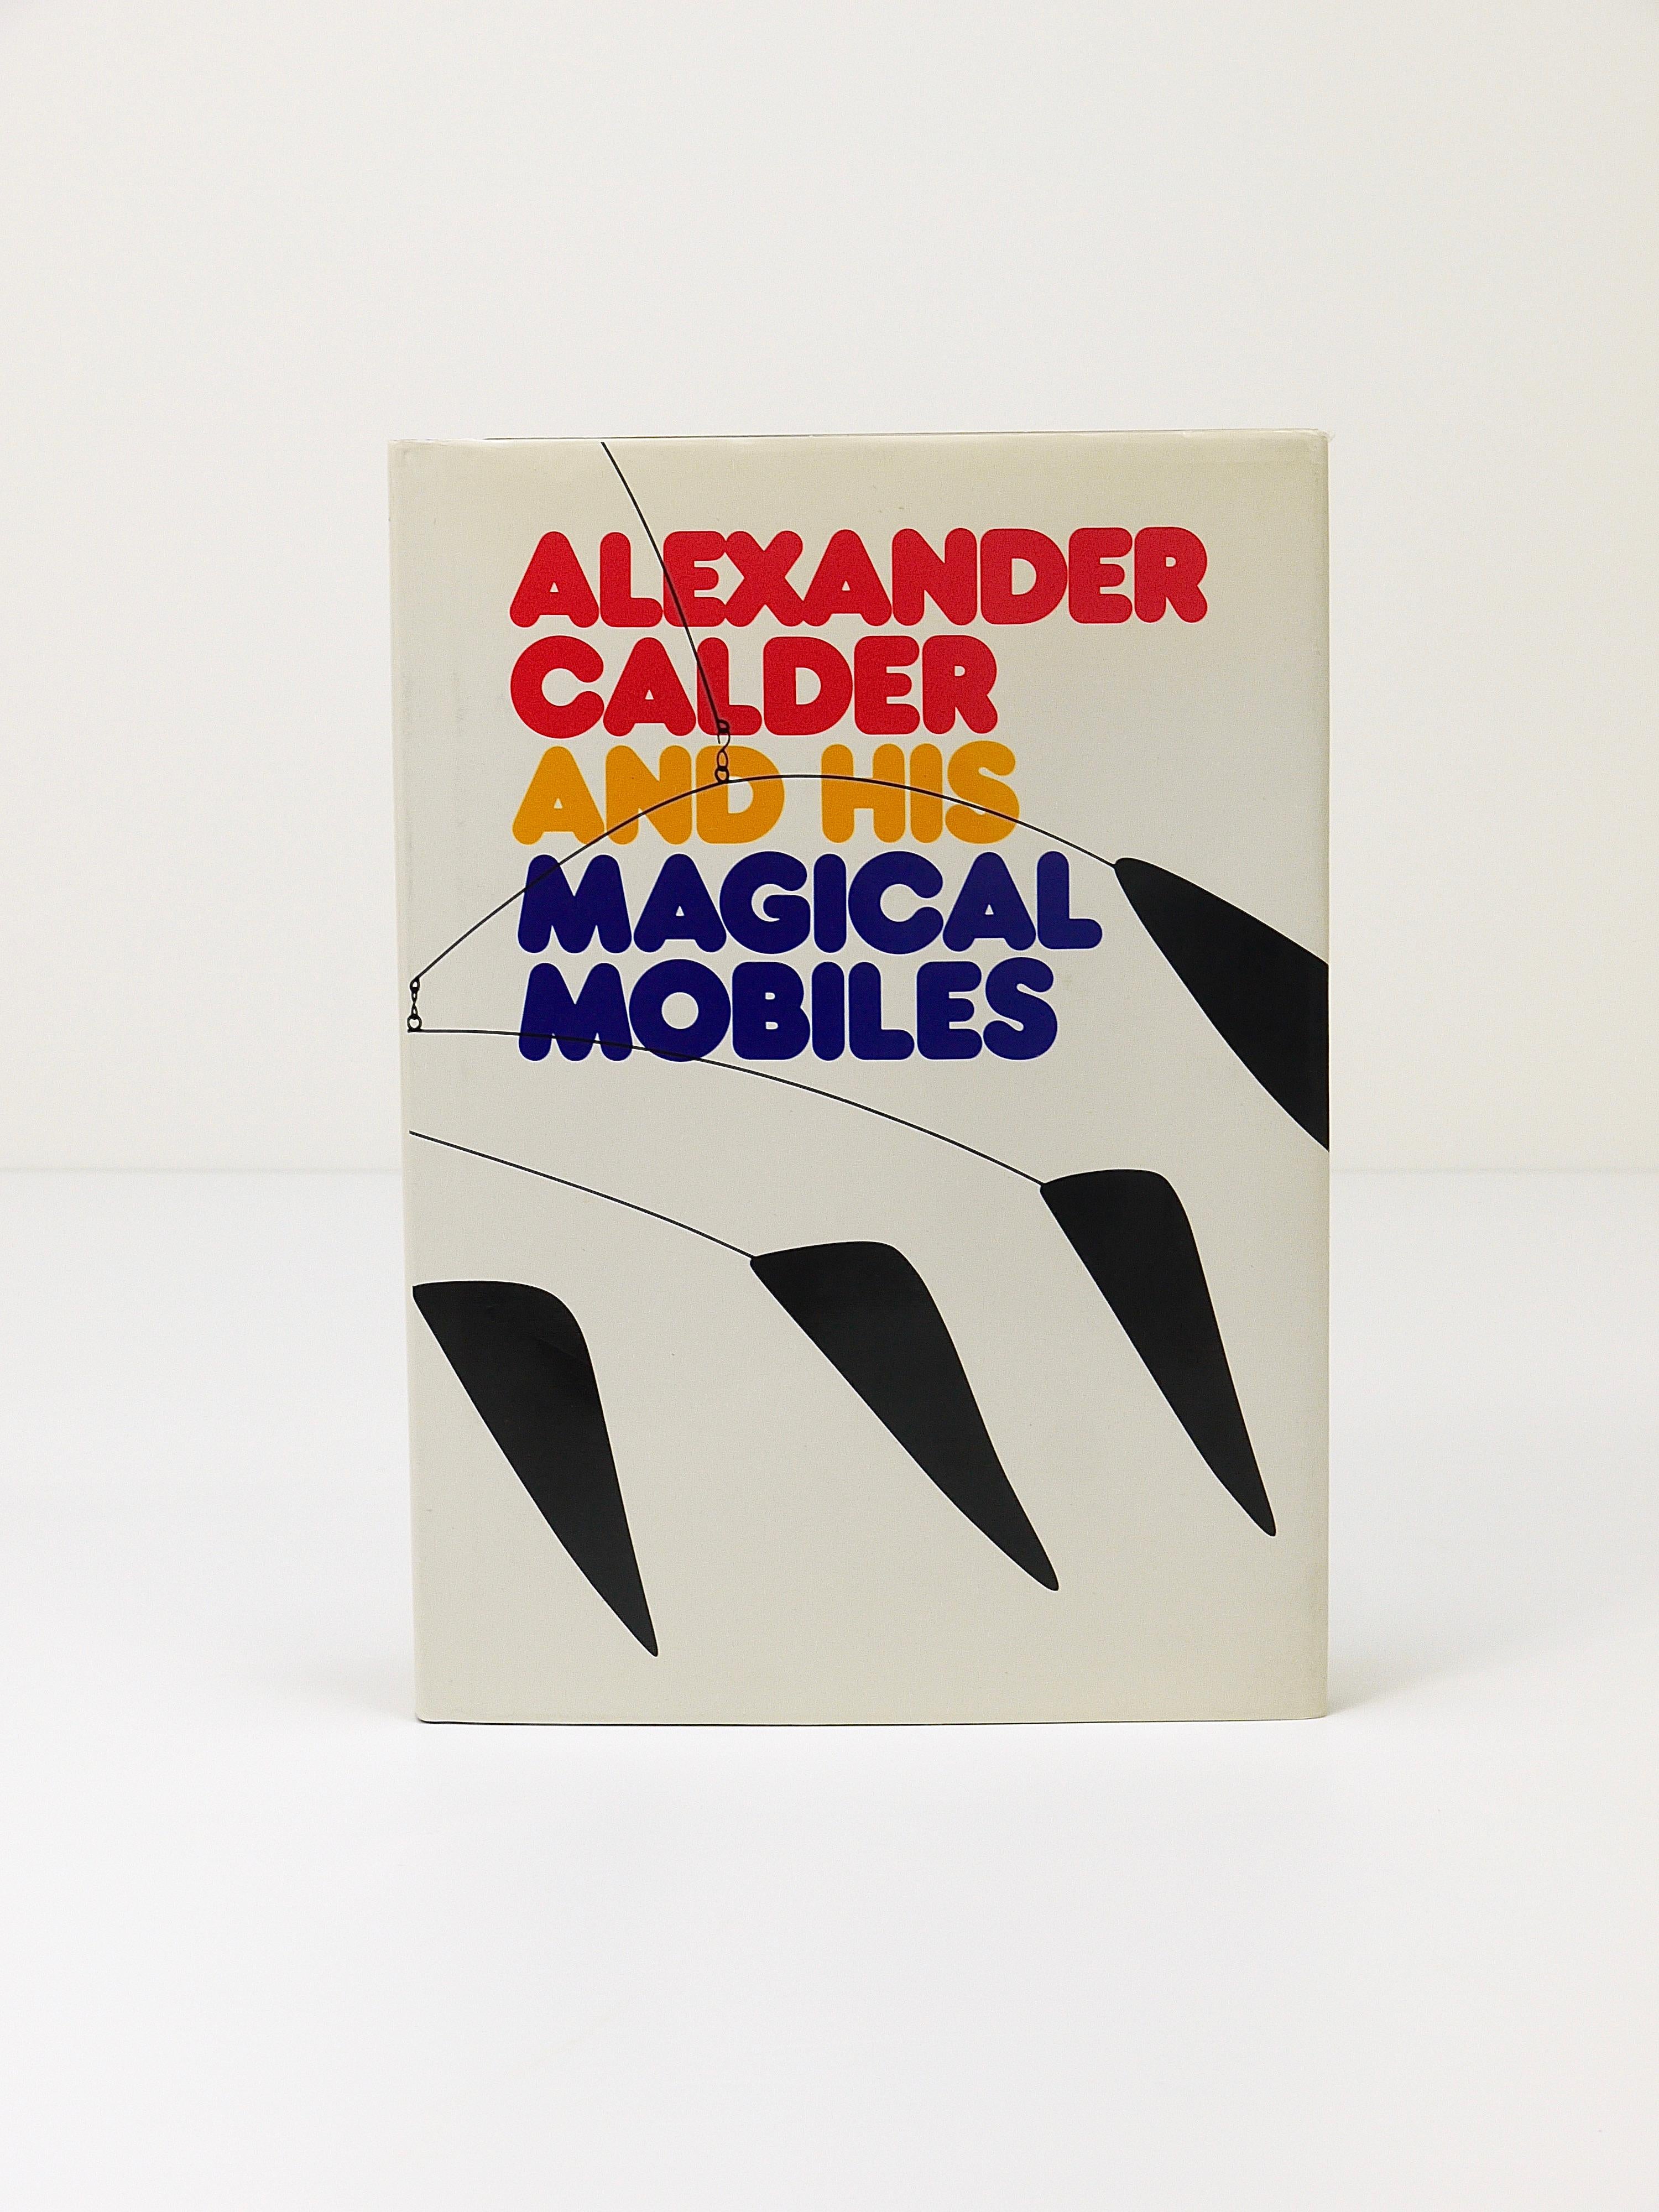 Alexander Calder and His Magical Mobiles Art Book, Lipman & Aspinwal, 1st Ed. In Good Condition For Sale In Vienna, AT